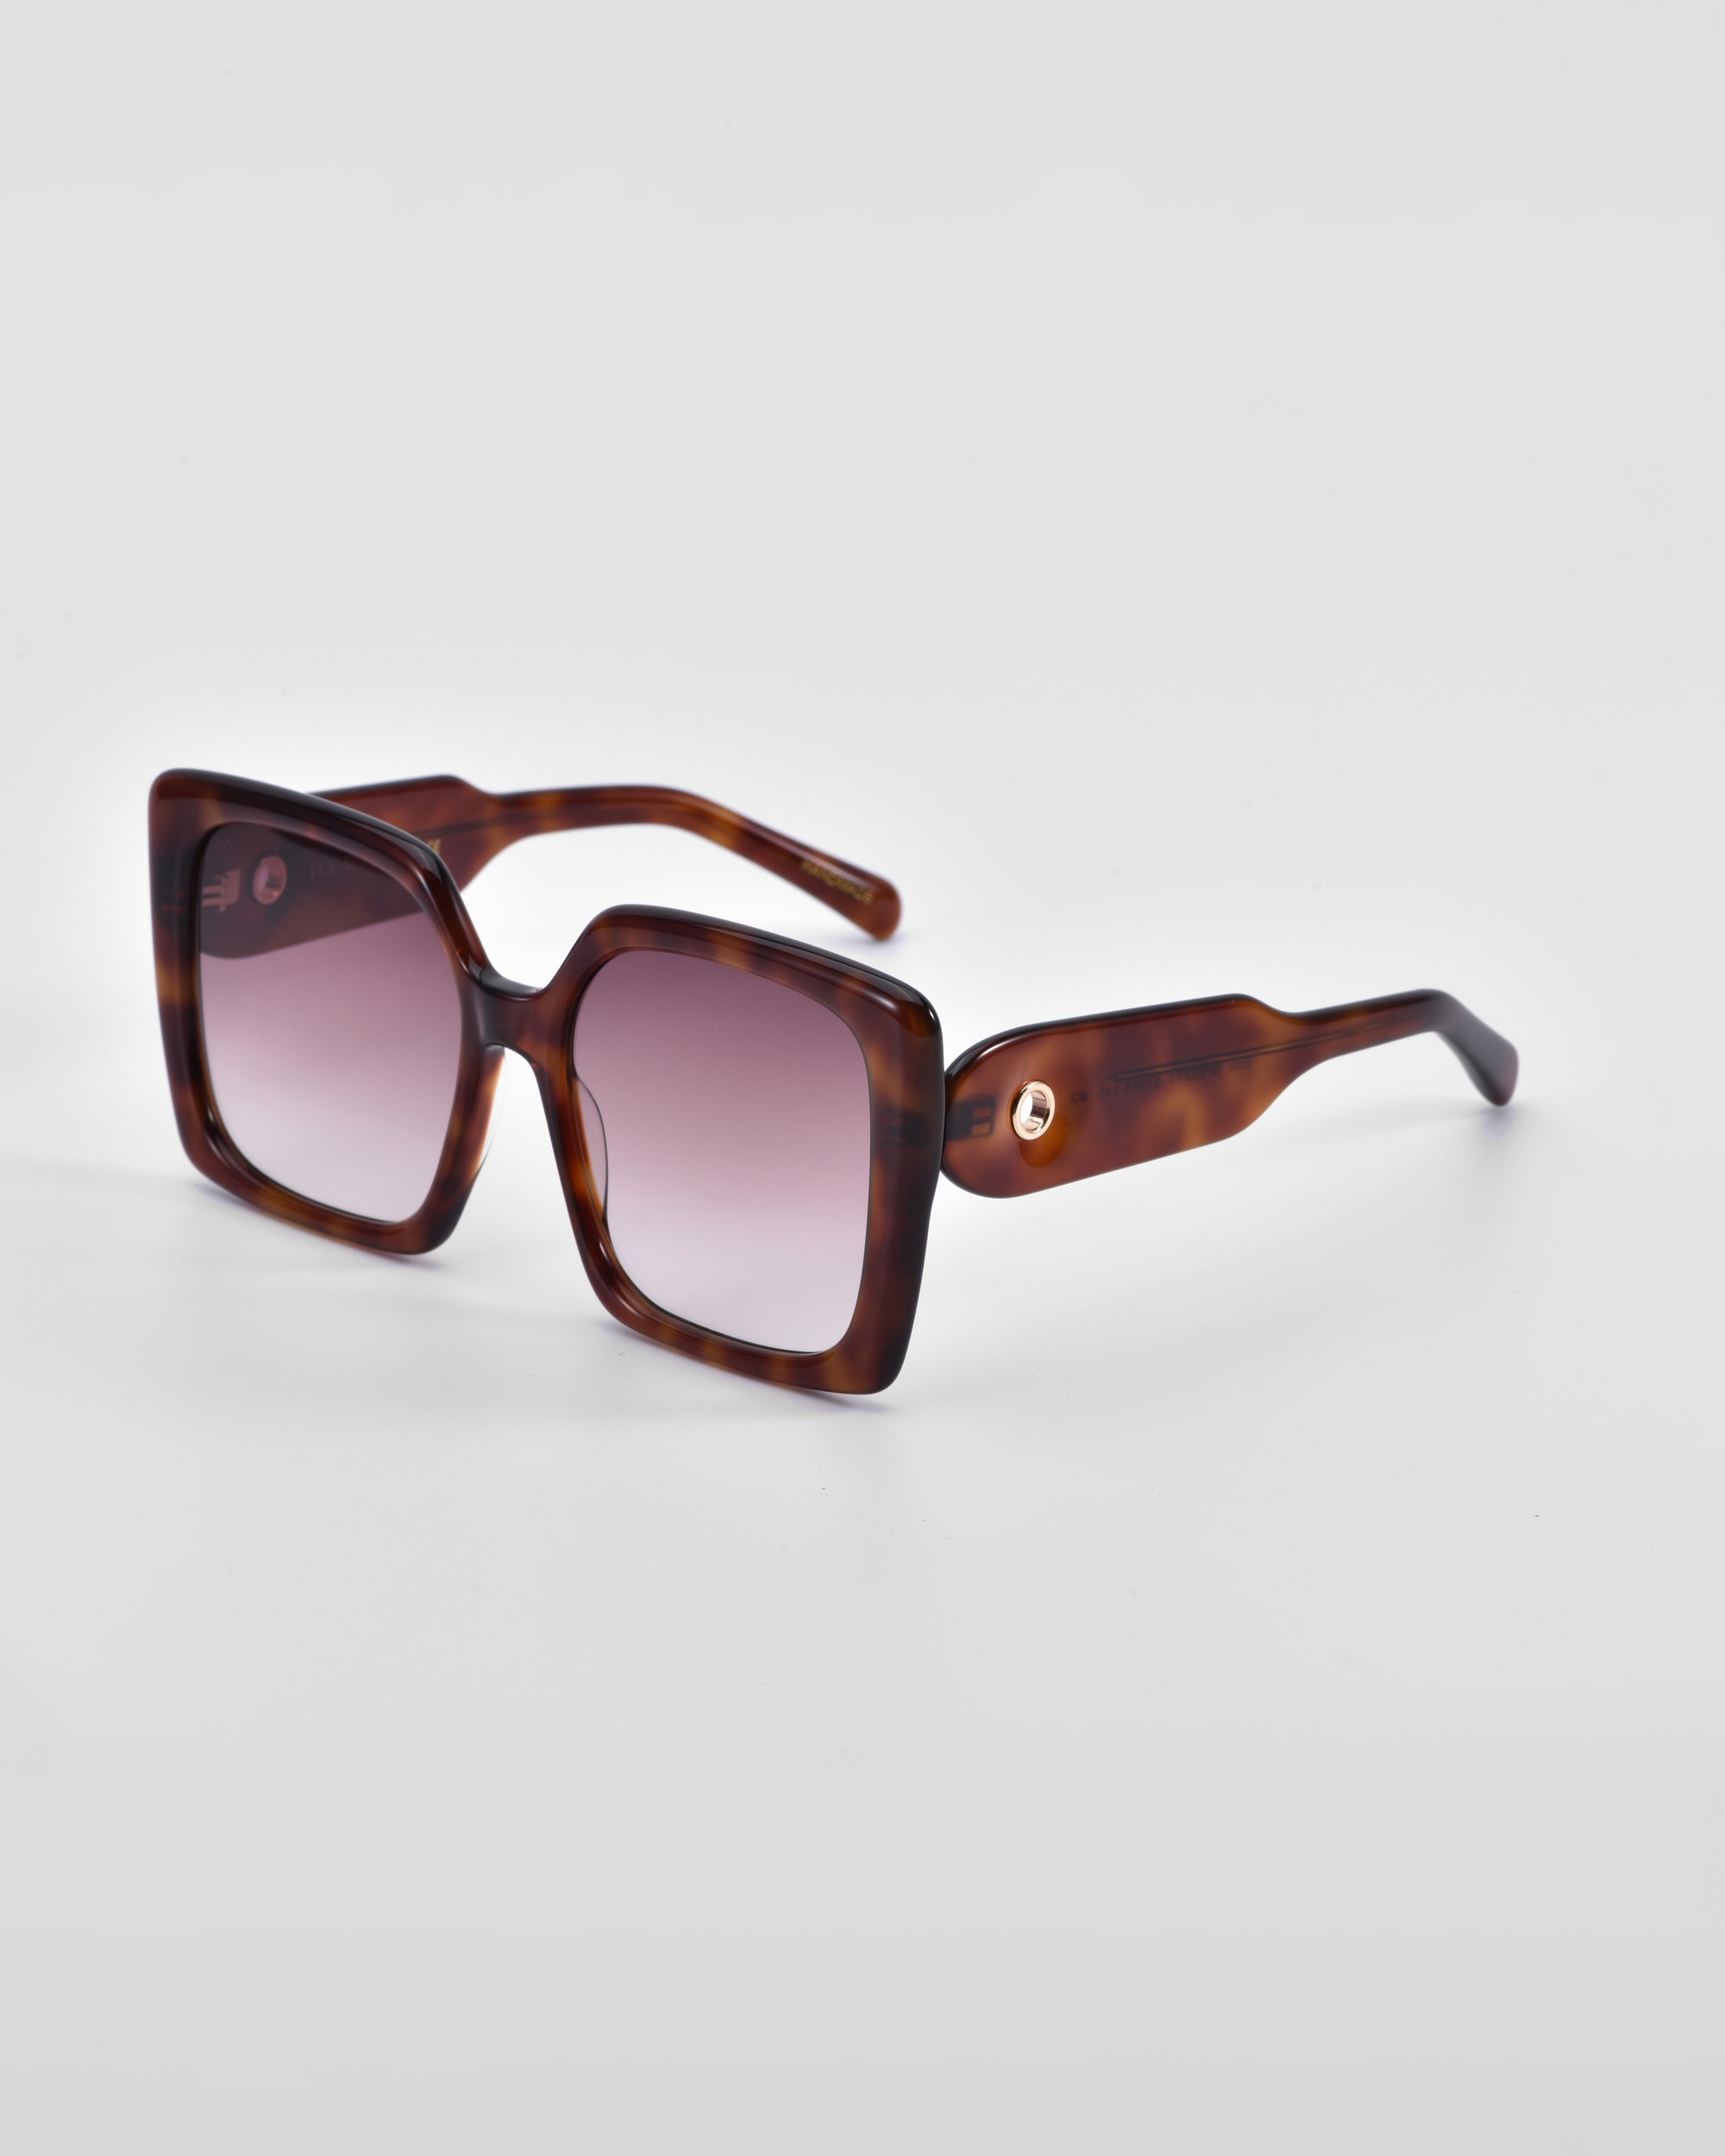 A pair of oversized soft-square sunglasses with brown tortoiseshell frames and gradient lenses. The thick frames feature classic temple round details and wide arms that taper as they extend. The **Eos** sunglasses by **For Art&#39;s Sake®** are positioned on a plain white background.